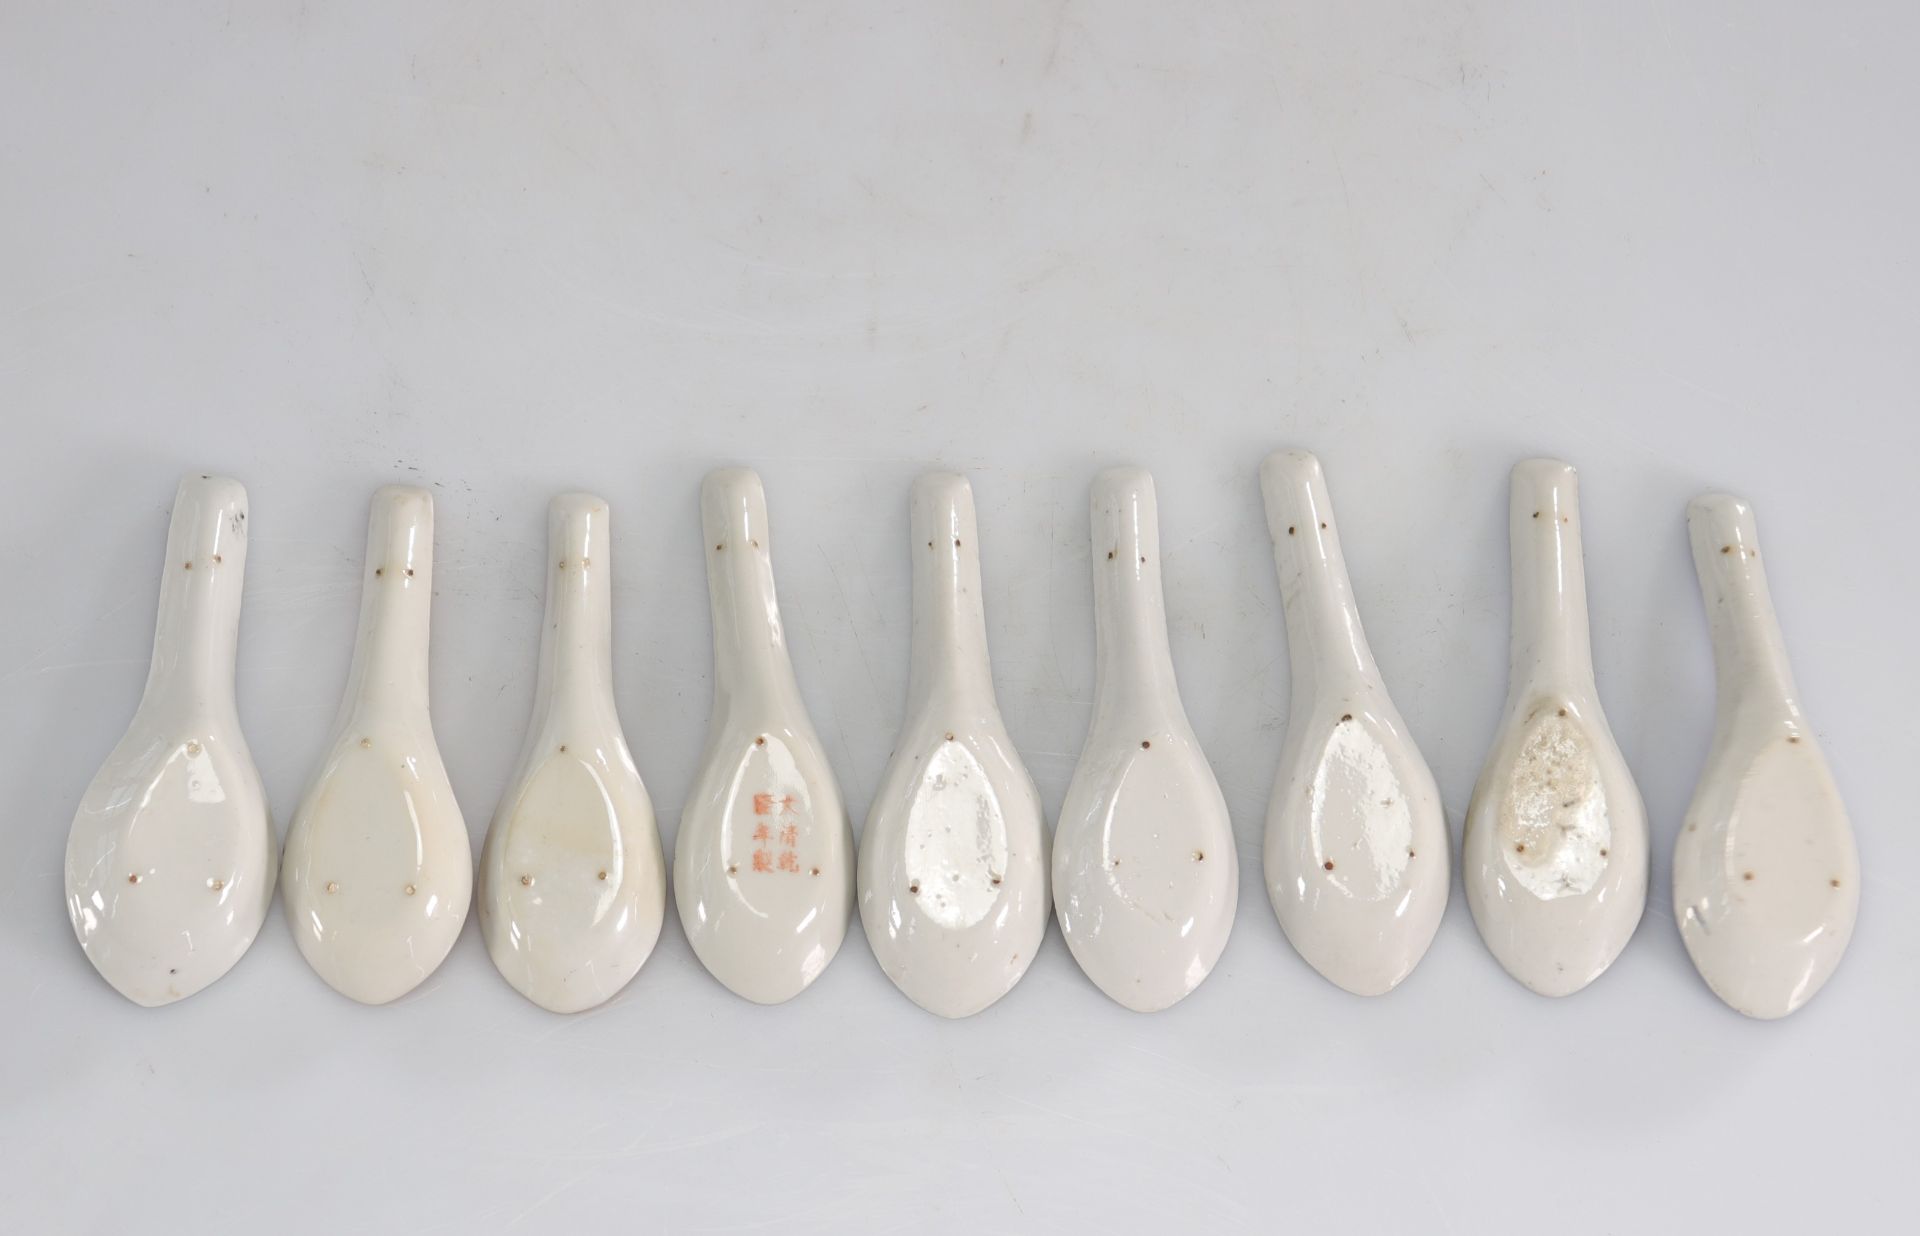 Spoons (9) in Chinese porcelain various decorations - Image 2 of 2